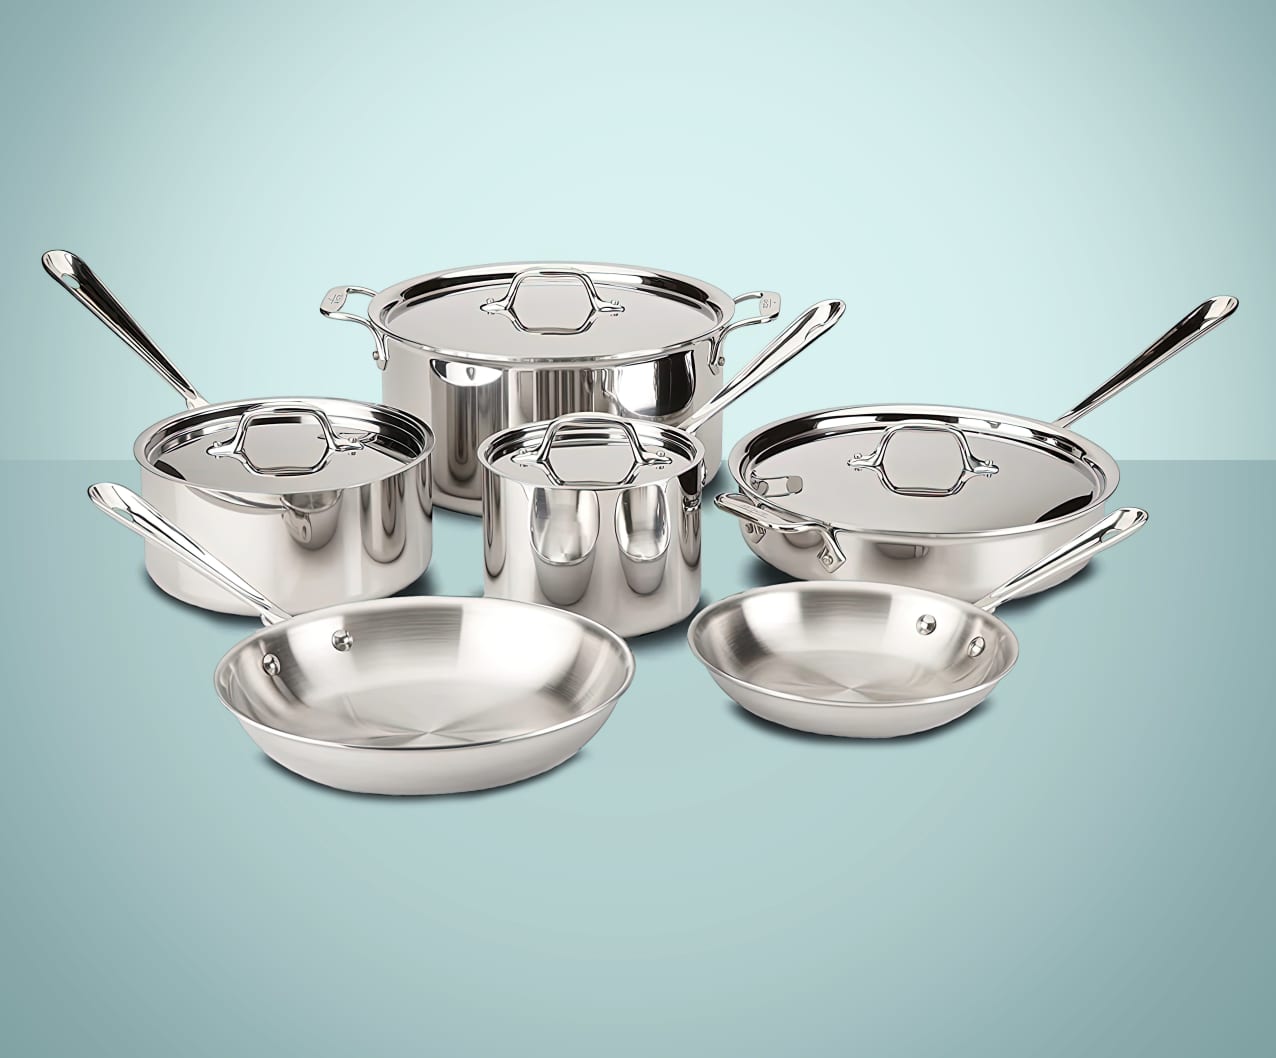 A selection of different types of pans and pots